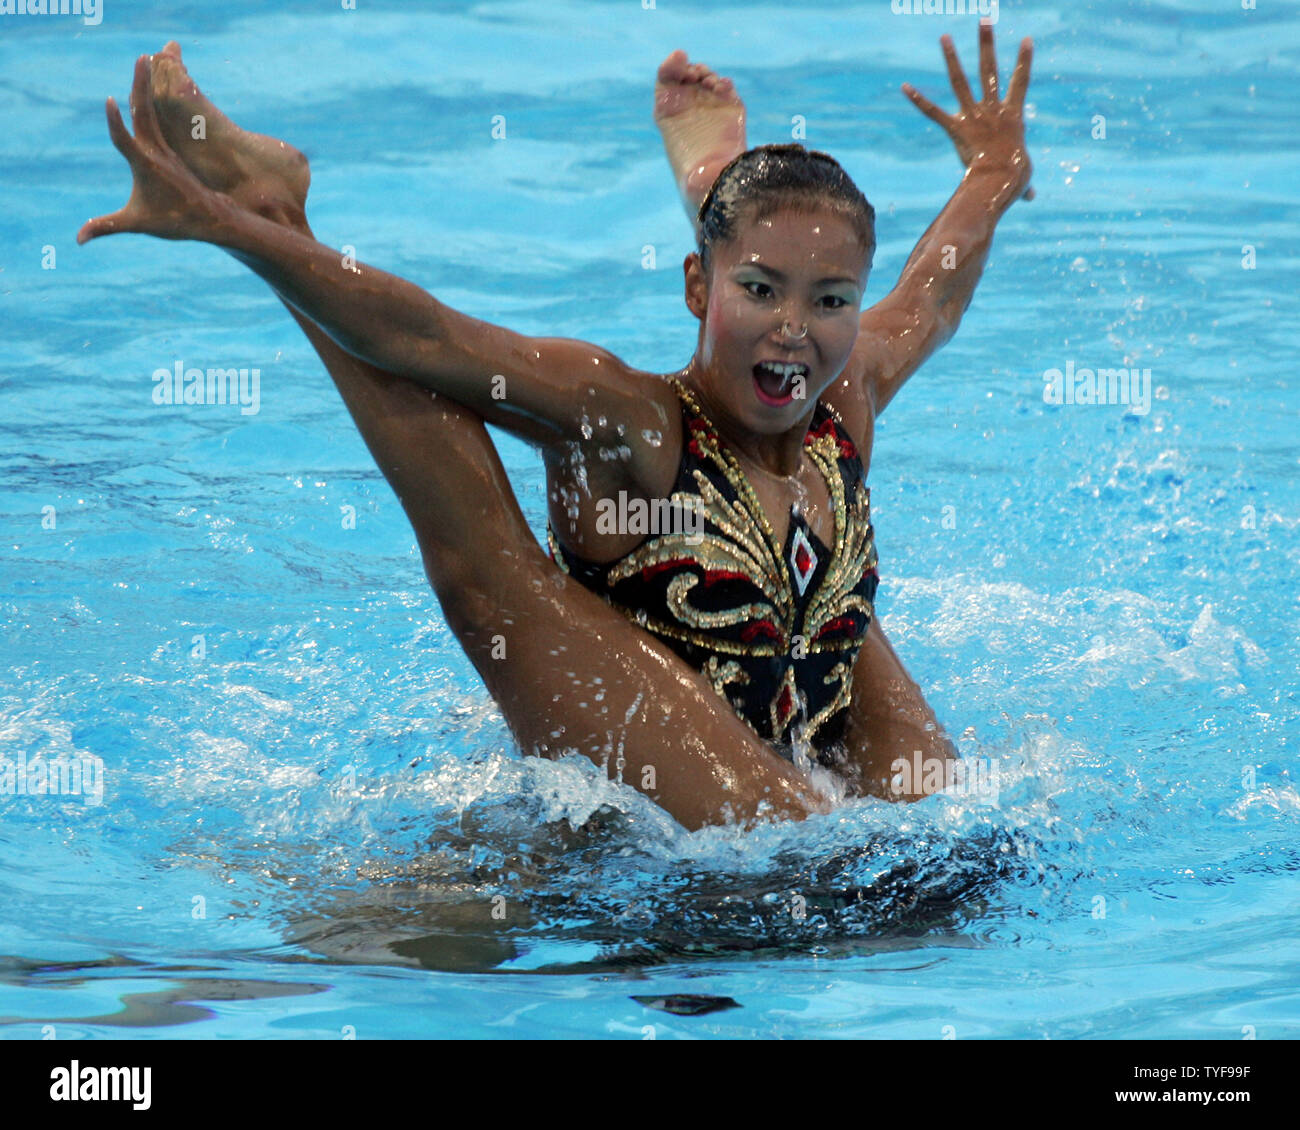 Japanese synchronized swimmers Saho Harada (above water) and Emiko Suzuki perform their final duet routine  at the XI FINA World Championships in Montreal, Canada on July 22, 2005.  Harada and Suzuki earned the bronze medal behind Russians Davydova and Ermakova and the Spanish duet Mengual and Tirados. (UPI Photo / Grace Chiu) Stock Photo